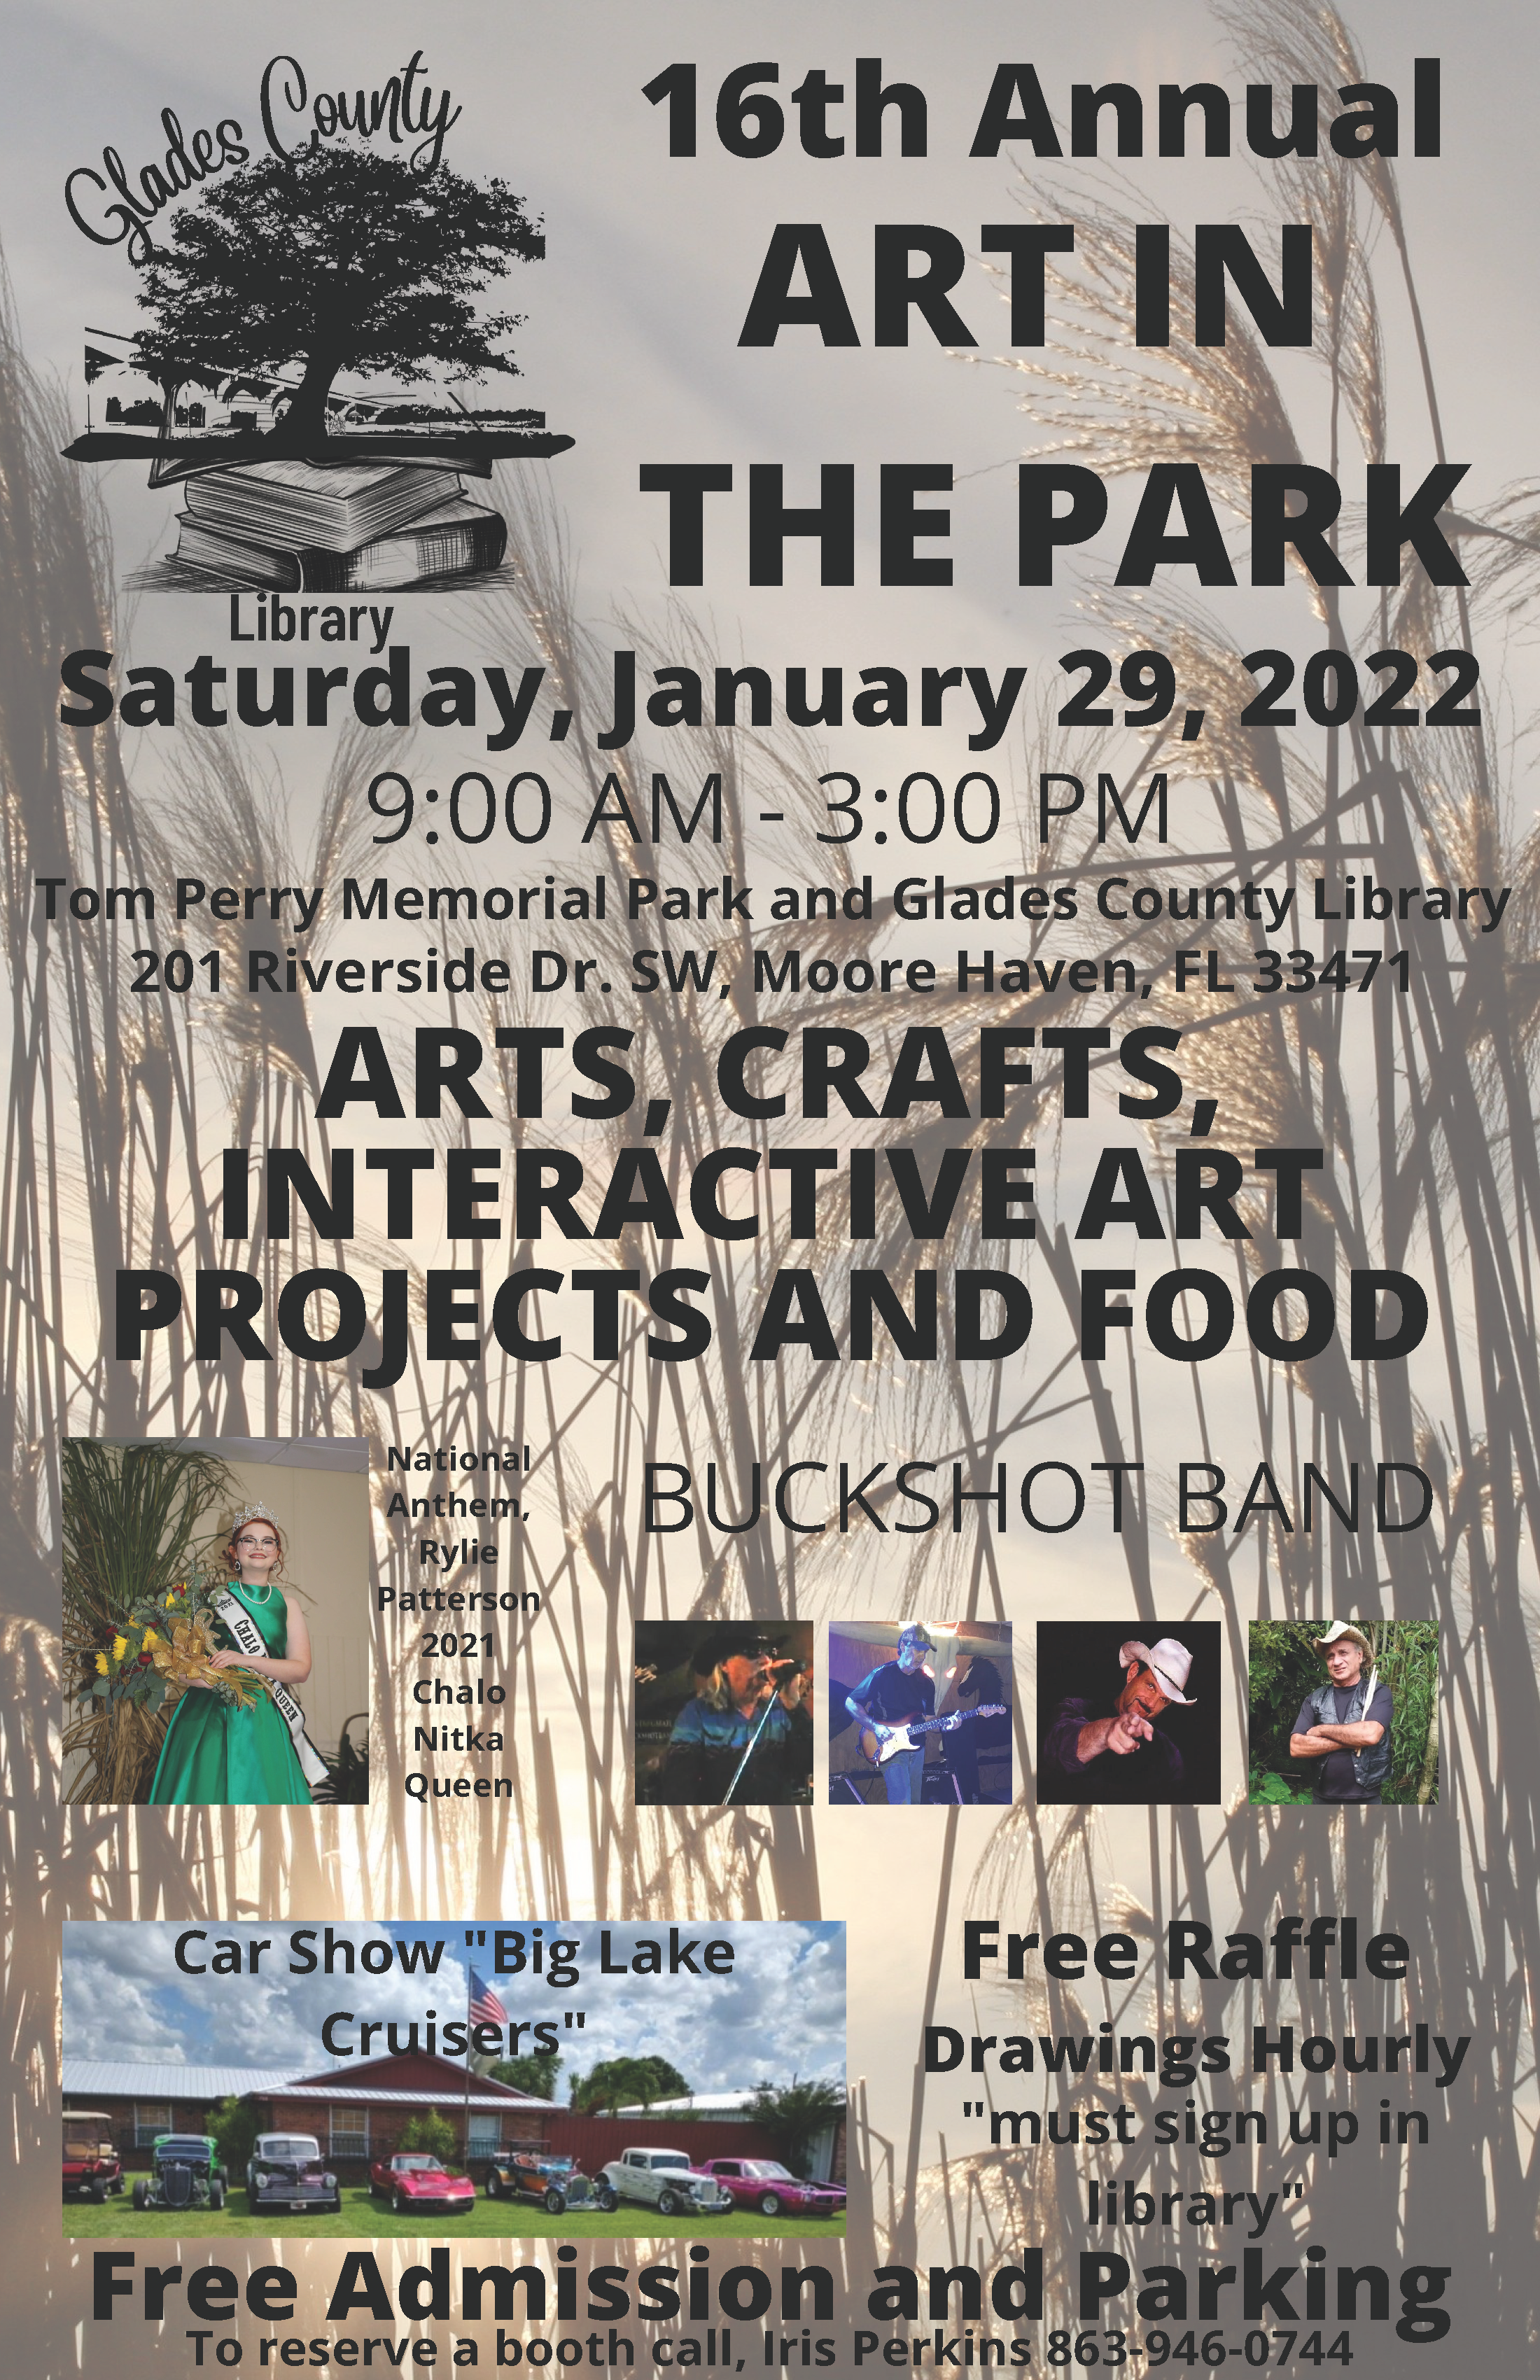 Art in the Park at Glades County Library on January 29, 9 a.m. to 3 p.m.